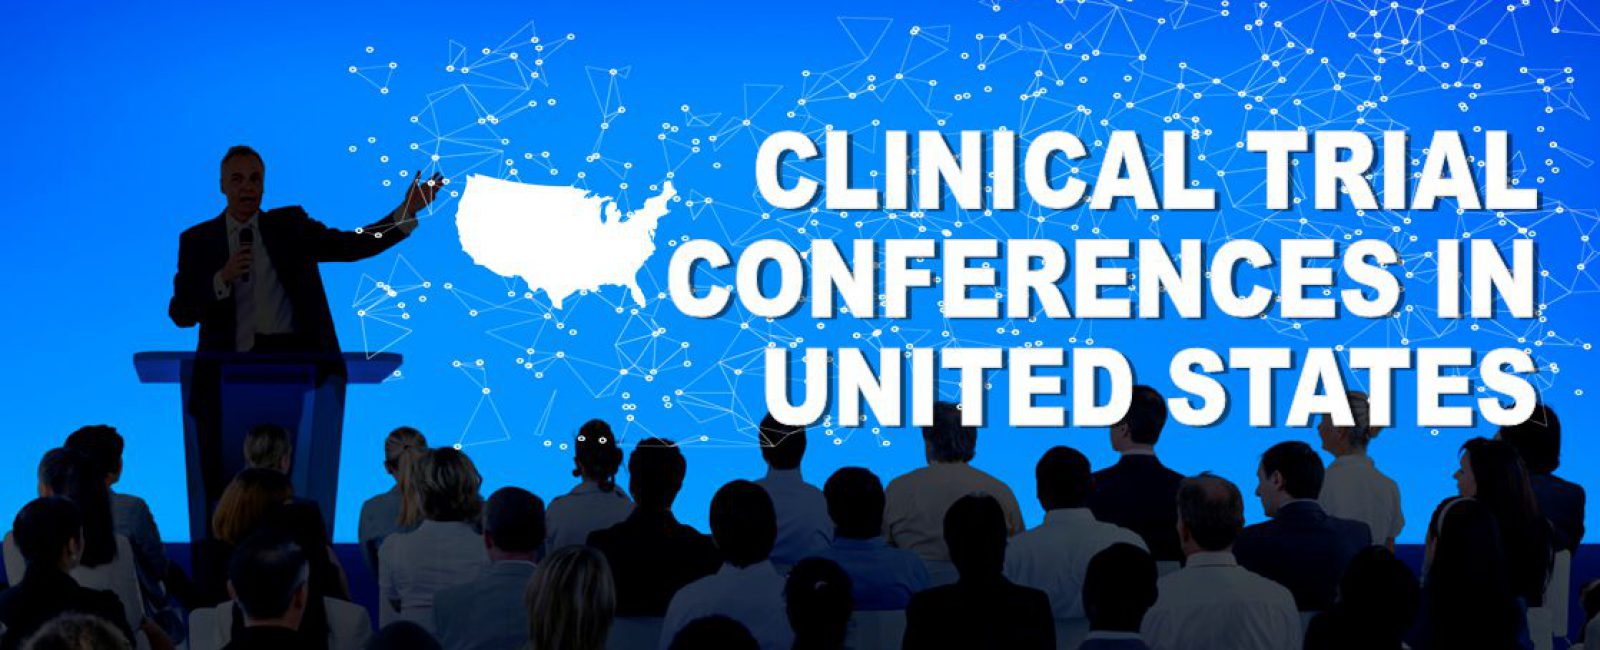 2017 Clinical Trial and Research Conferences, Events in United States